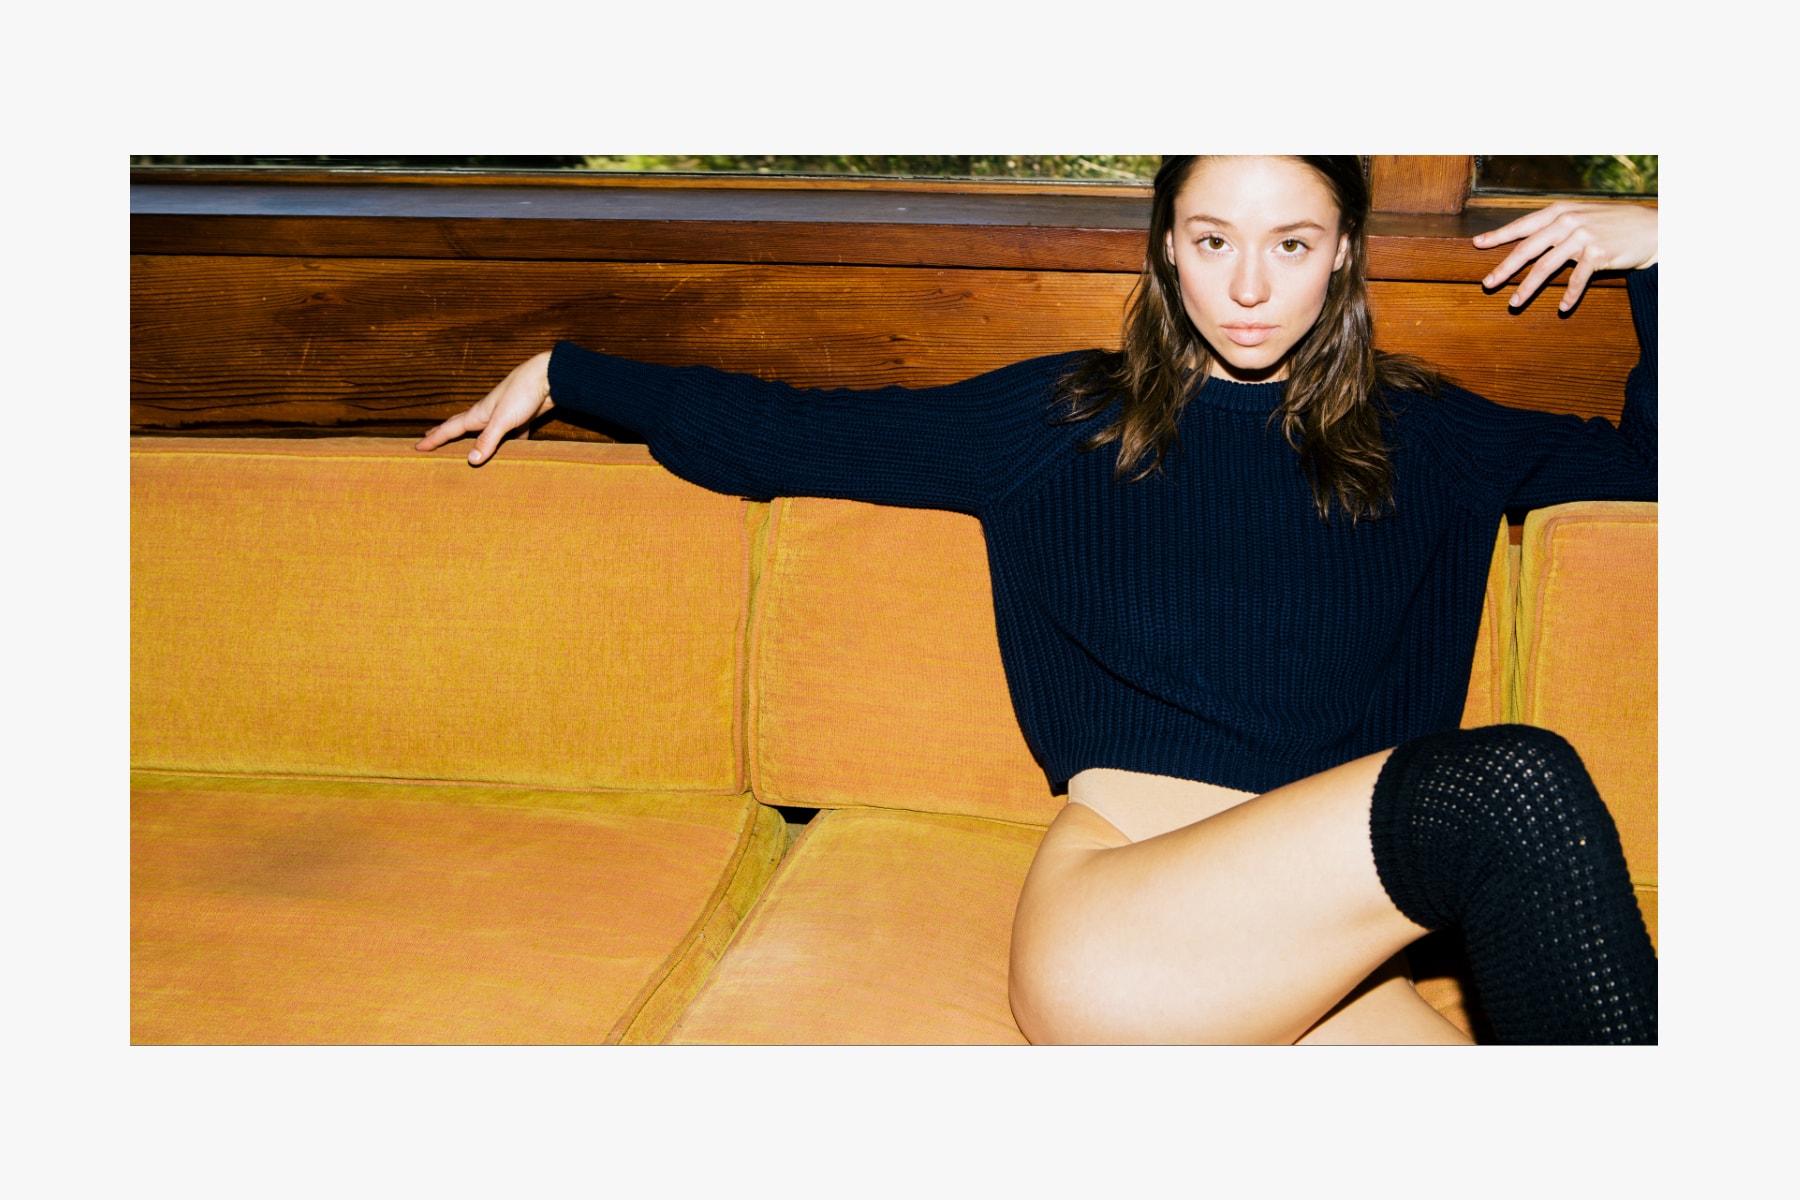 American Apparel Re-Launches Global Web Store Gildan Back to Basics Dov Charney Campaign Lookbook T-Shirts Sweatshirts Jersey